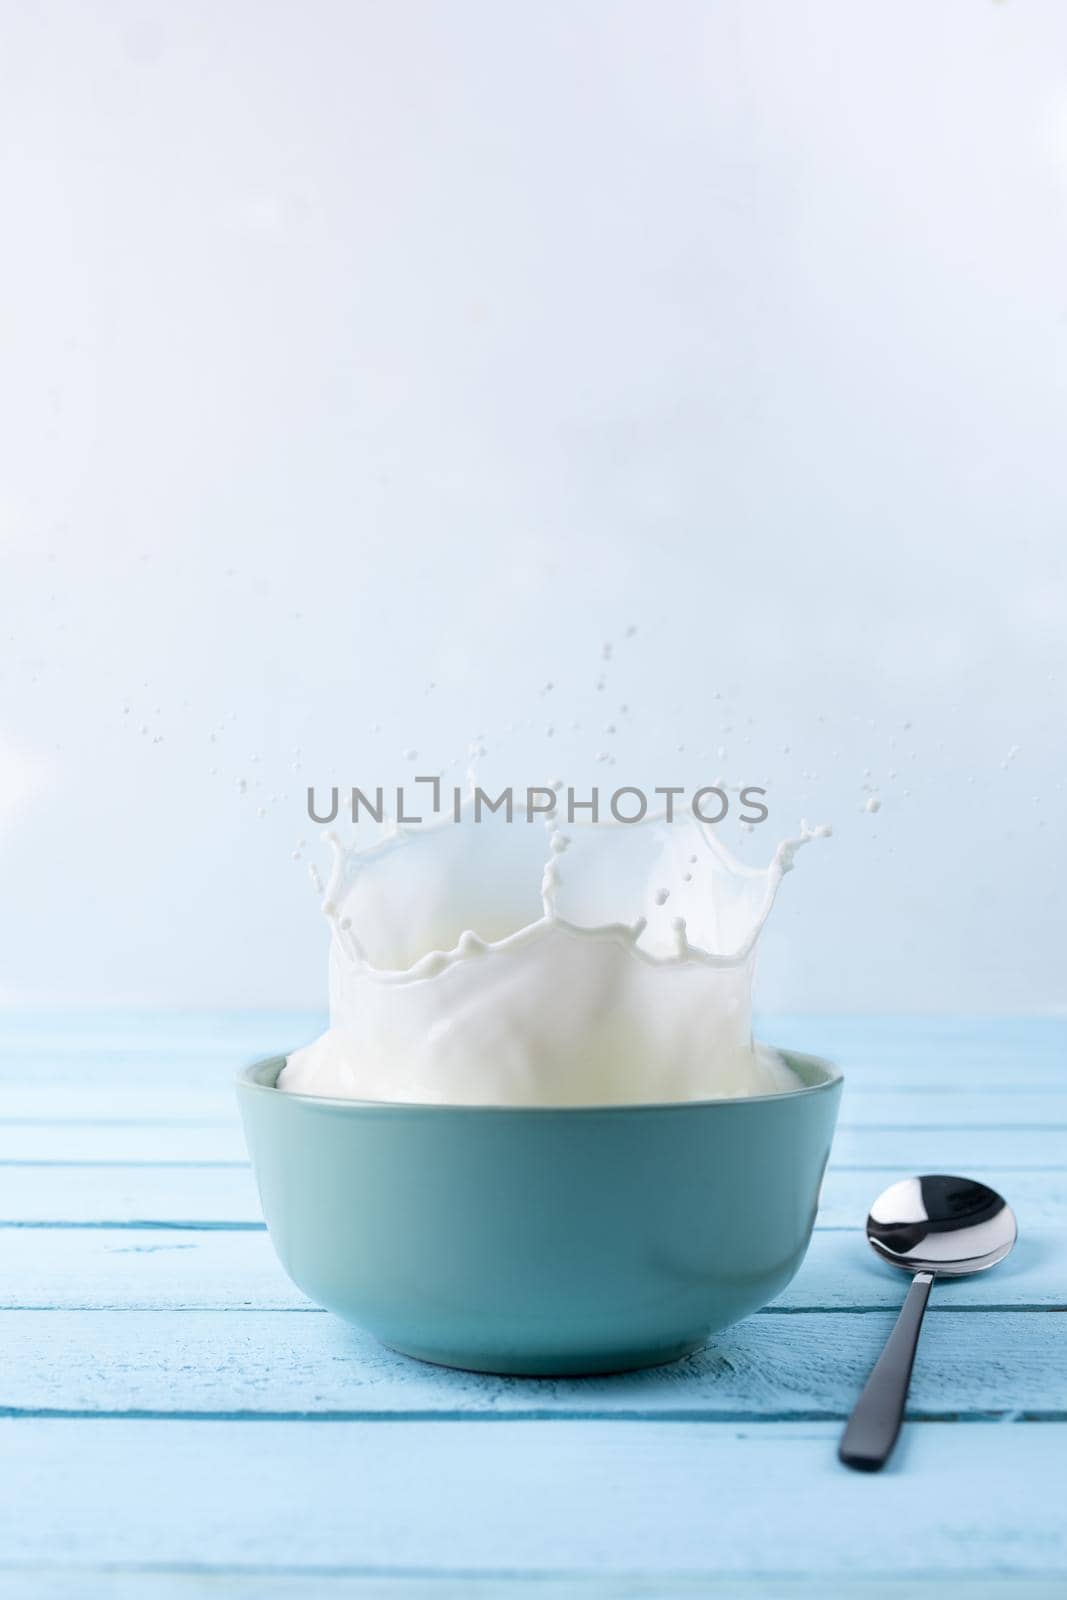 Splash of milk from the dish on a blue wooden background. by sashokddt